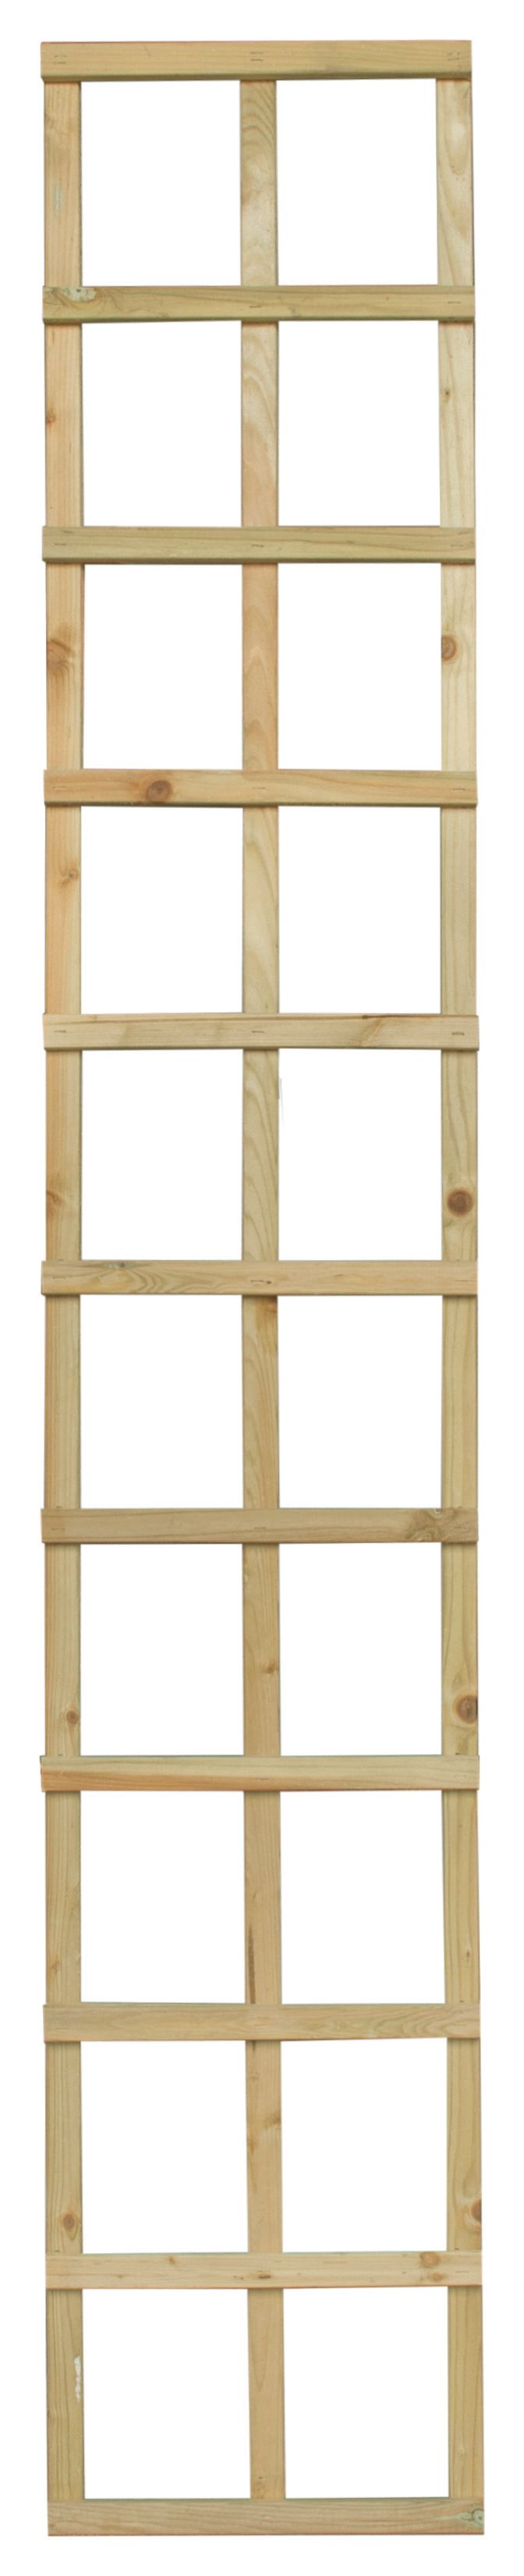 Forest Garden Smooth Planed Trellis Panel - 300 x 1800mm